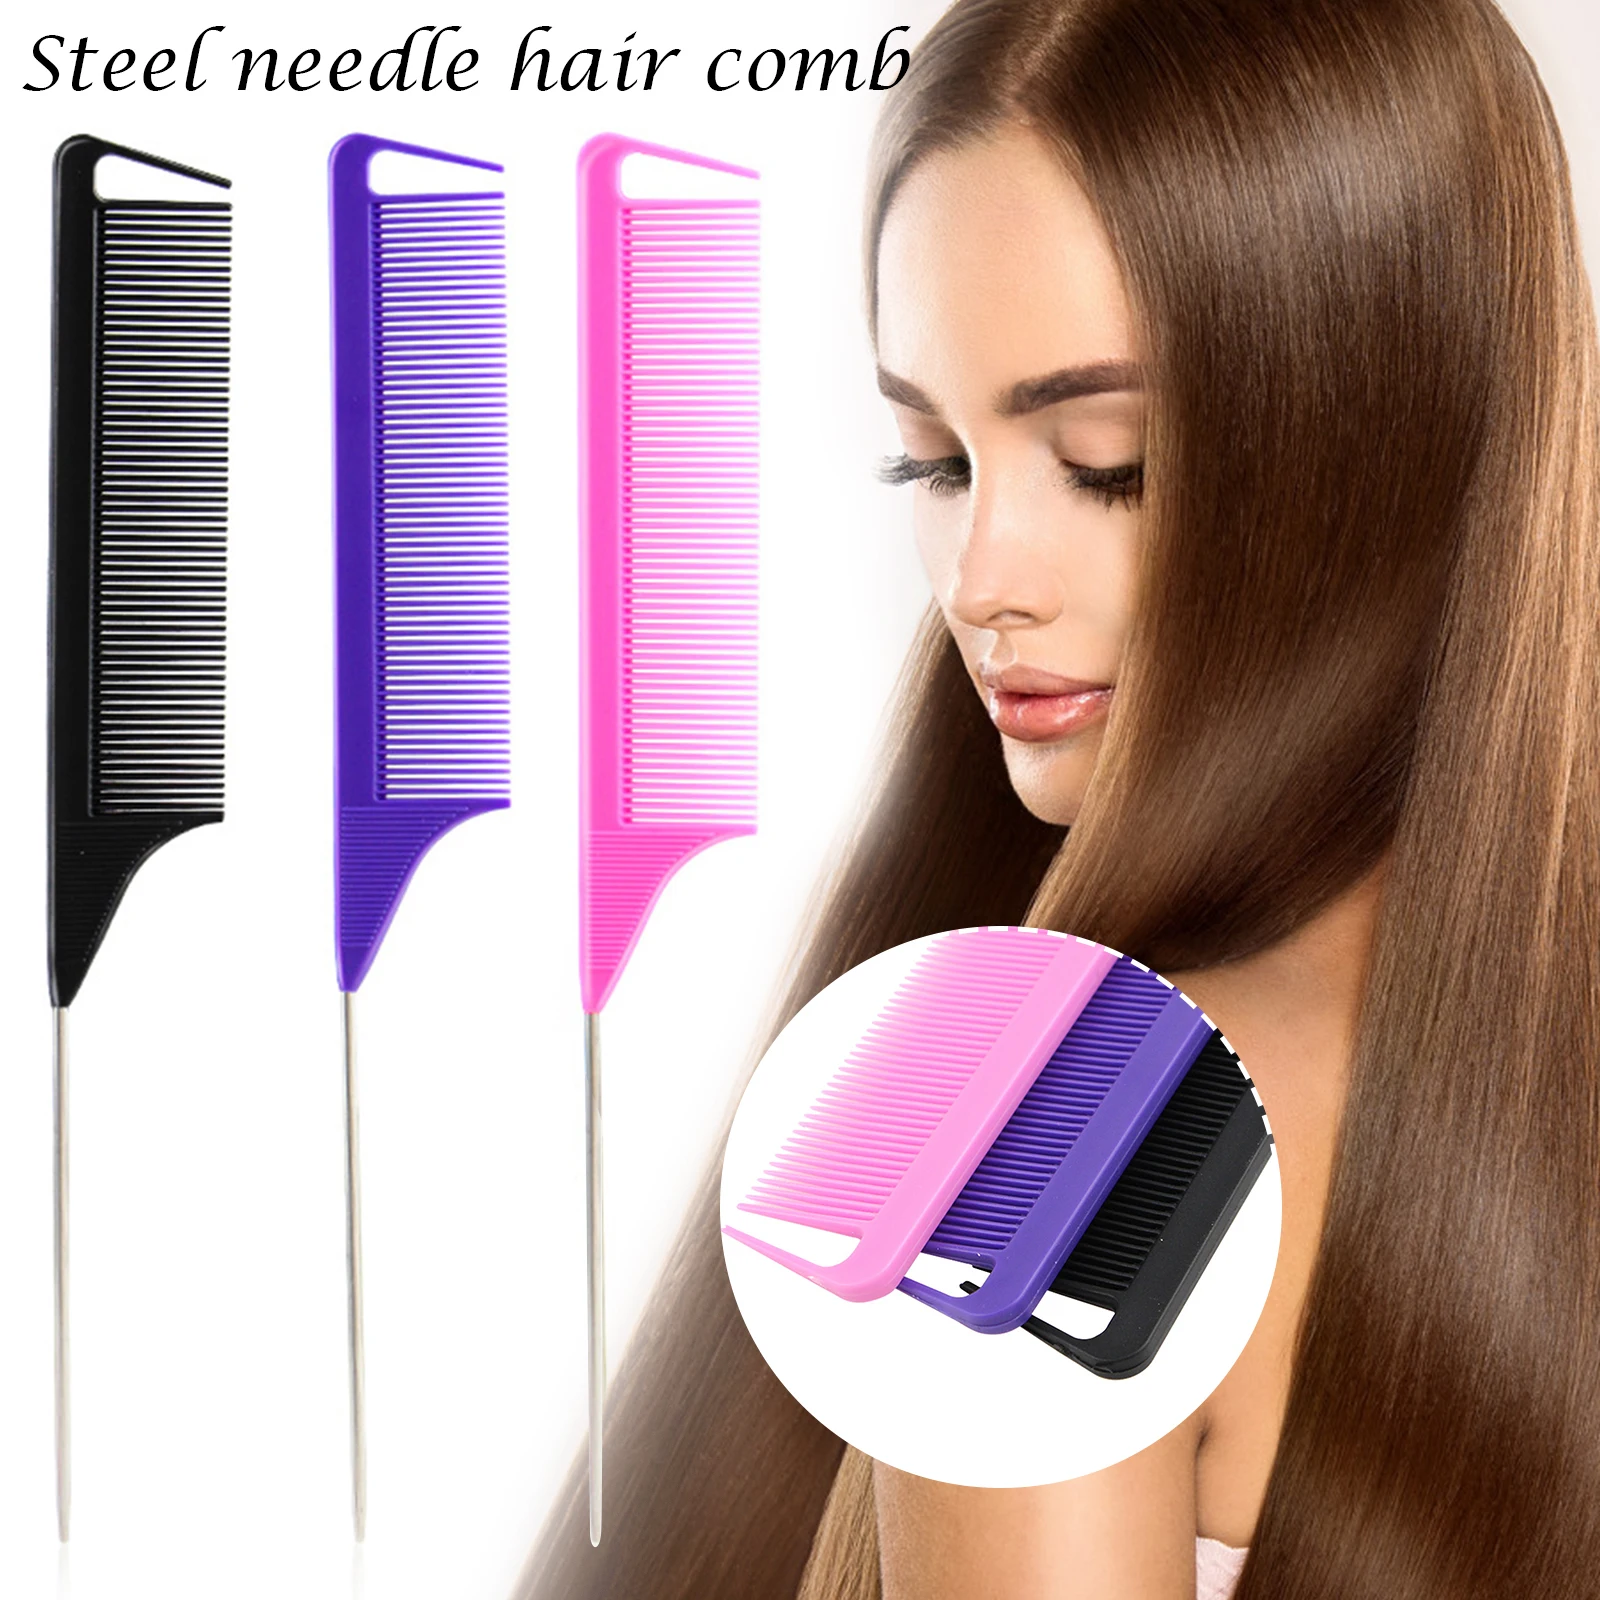 

High Quality Combs Hair Salon Dye Comb Separate Parting For Hair Styling Hairdressing Antistatic Comb Hair